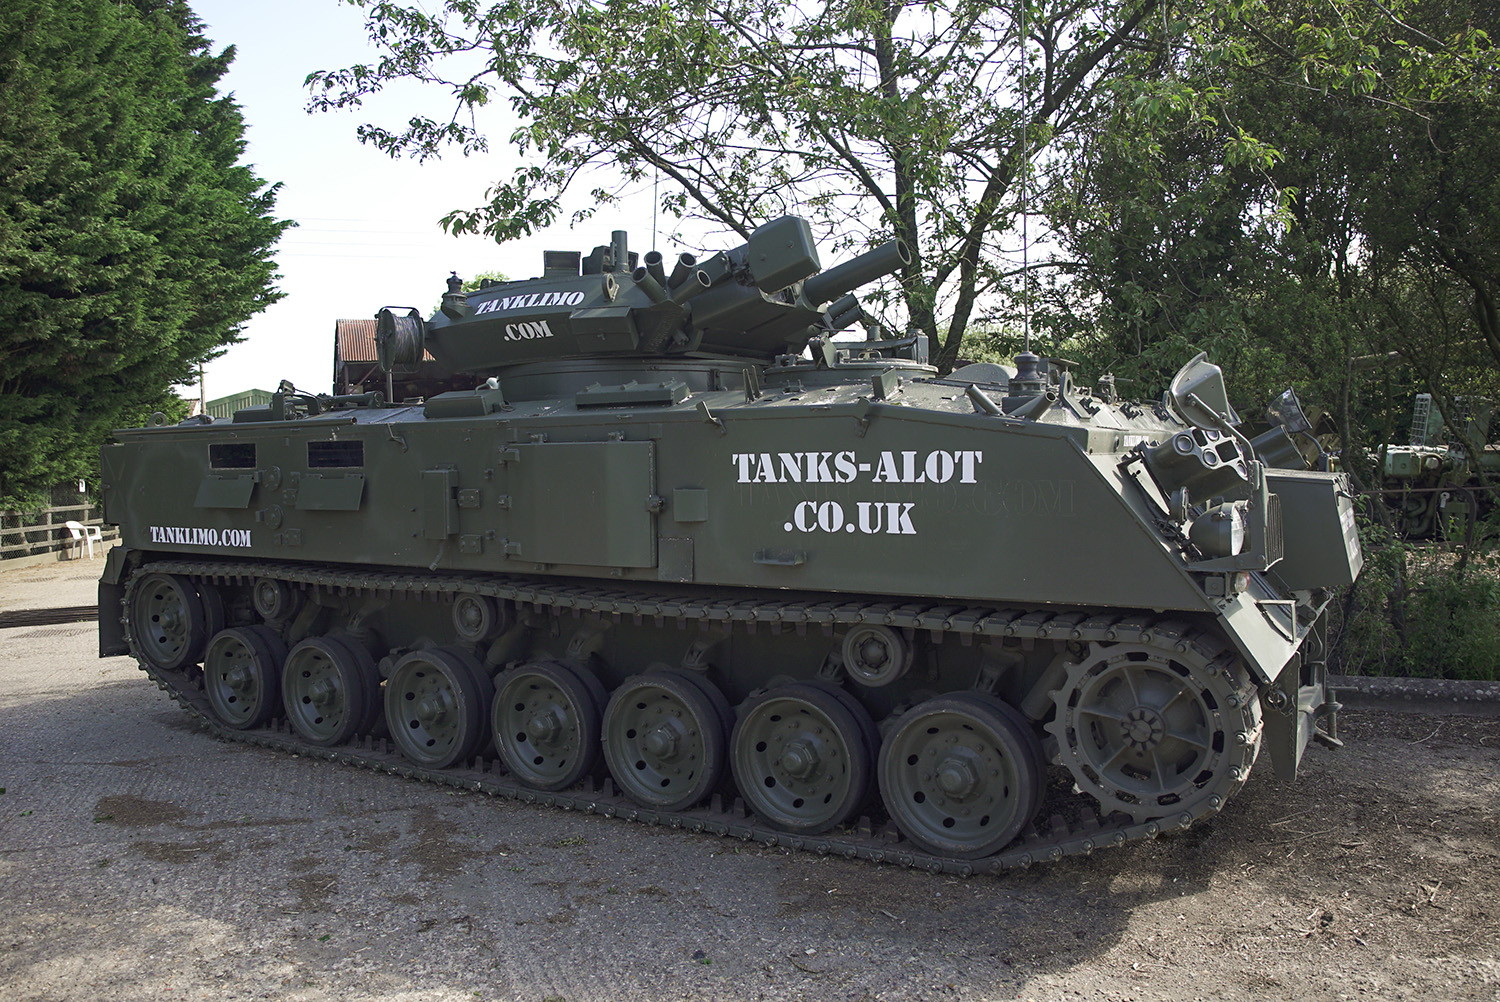 Exterior view of the UK based Tank Limo, a stretched limousine made from an armored personnel carrier